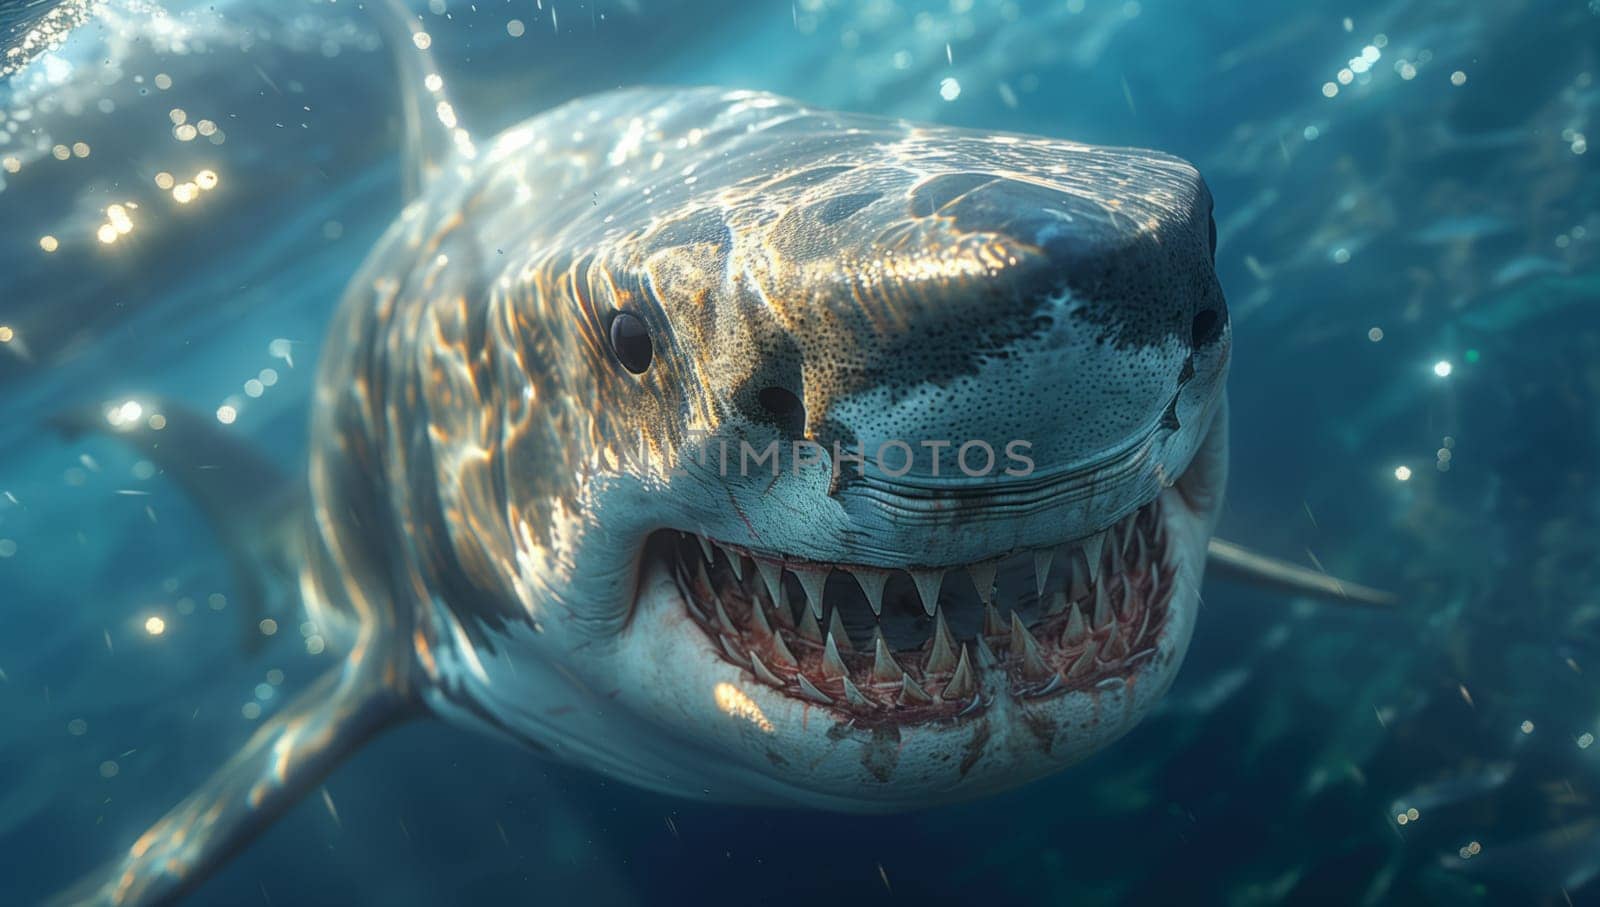 A Lamniformes shark is gracefully swimming in the water, showcasing its jaw with a wide smile as it filters fluid for food, a fascinating organism in marine biology